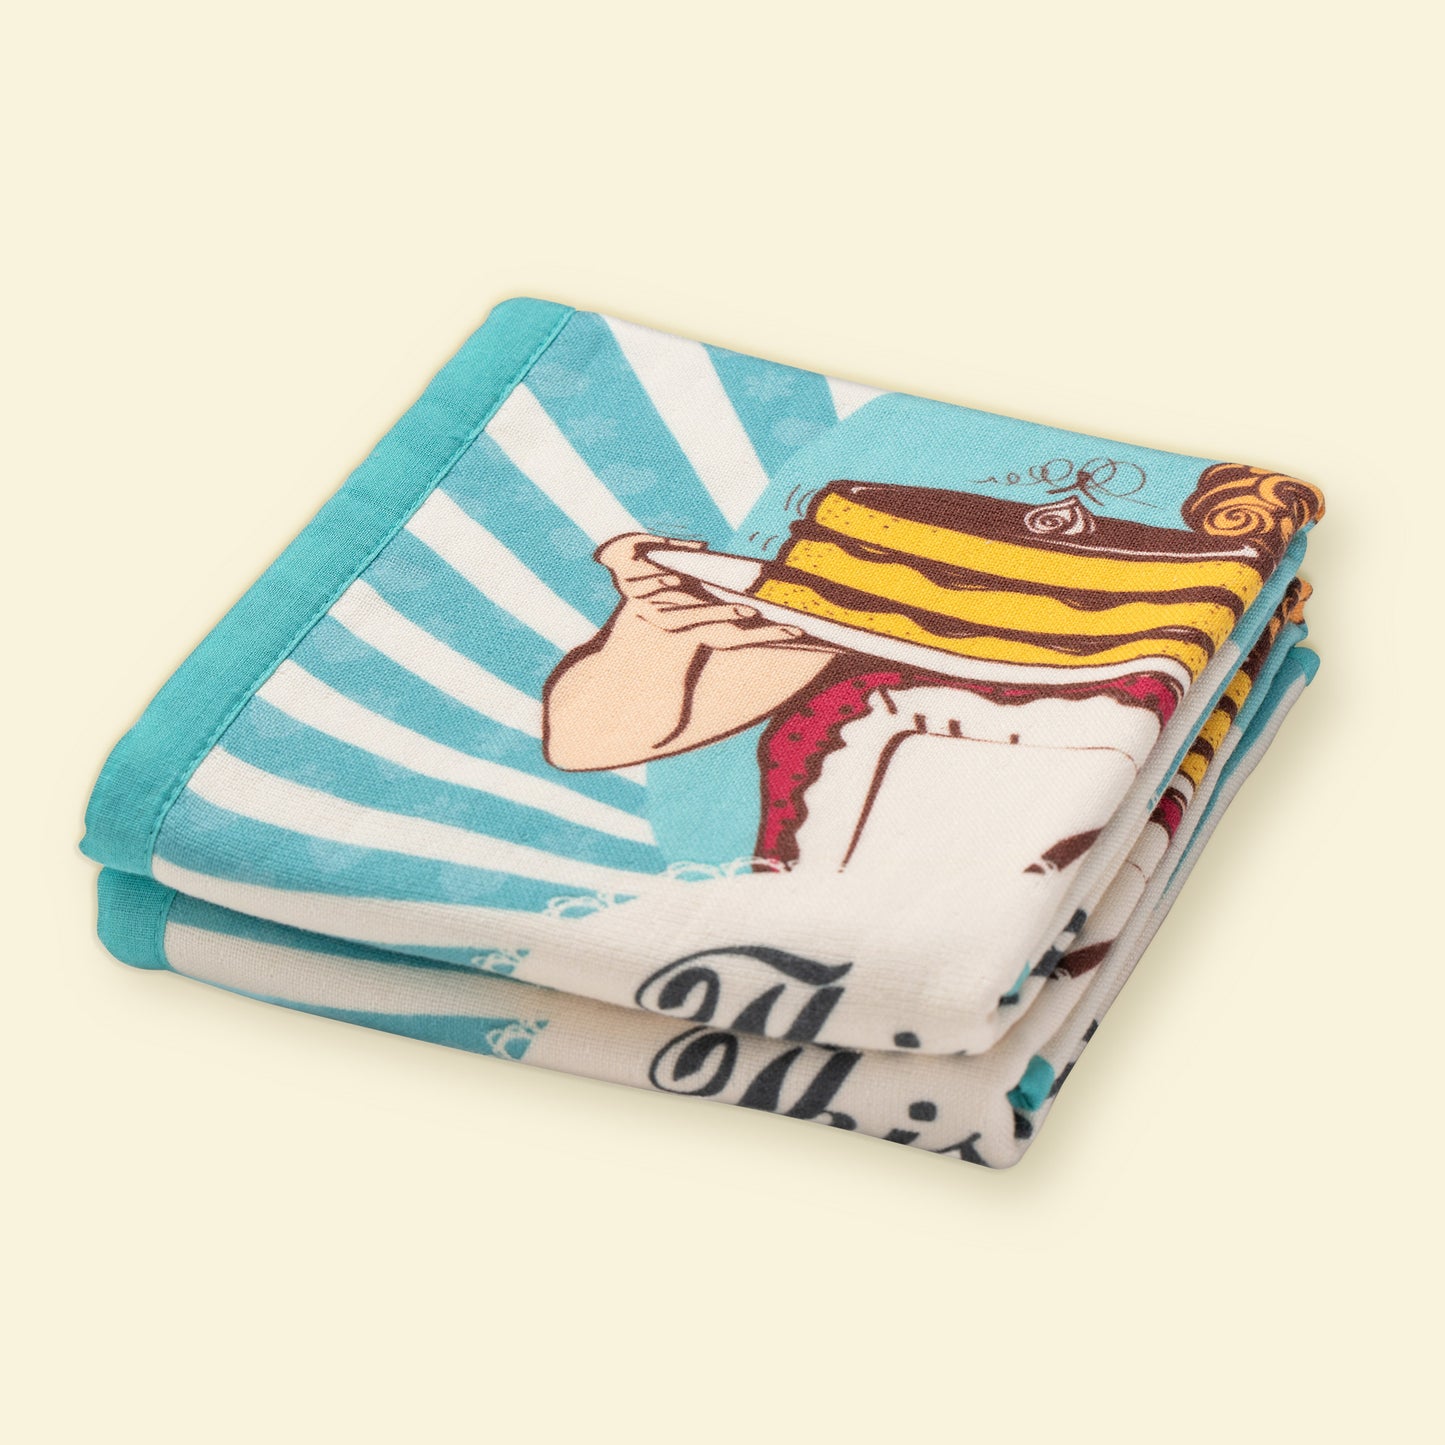 This Bitch Can Bake Kitchen Towel Set, Dish towels funny folded